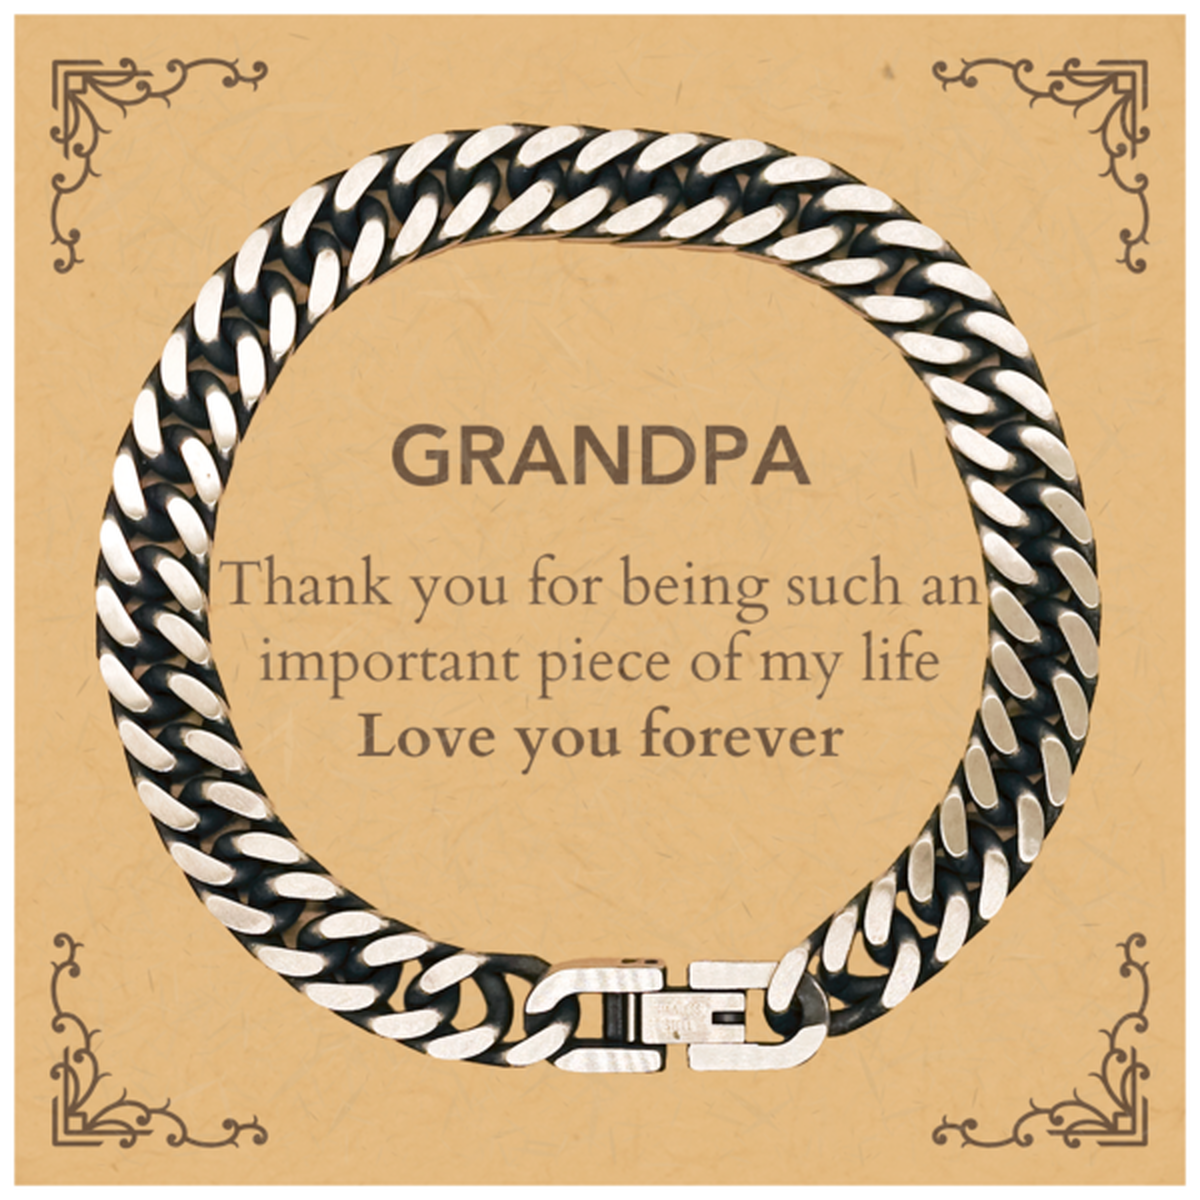 Appropriate Grandpa Cuban Link Chain Bracelet Epic Birthday Gifts for Grandpa Thank you for being such an important piece of my life Grandpa Christmas Mothers Fathers Day